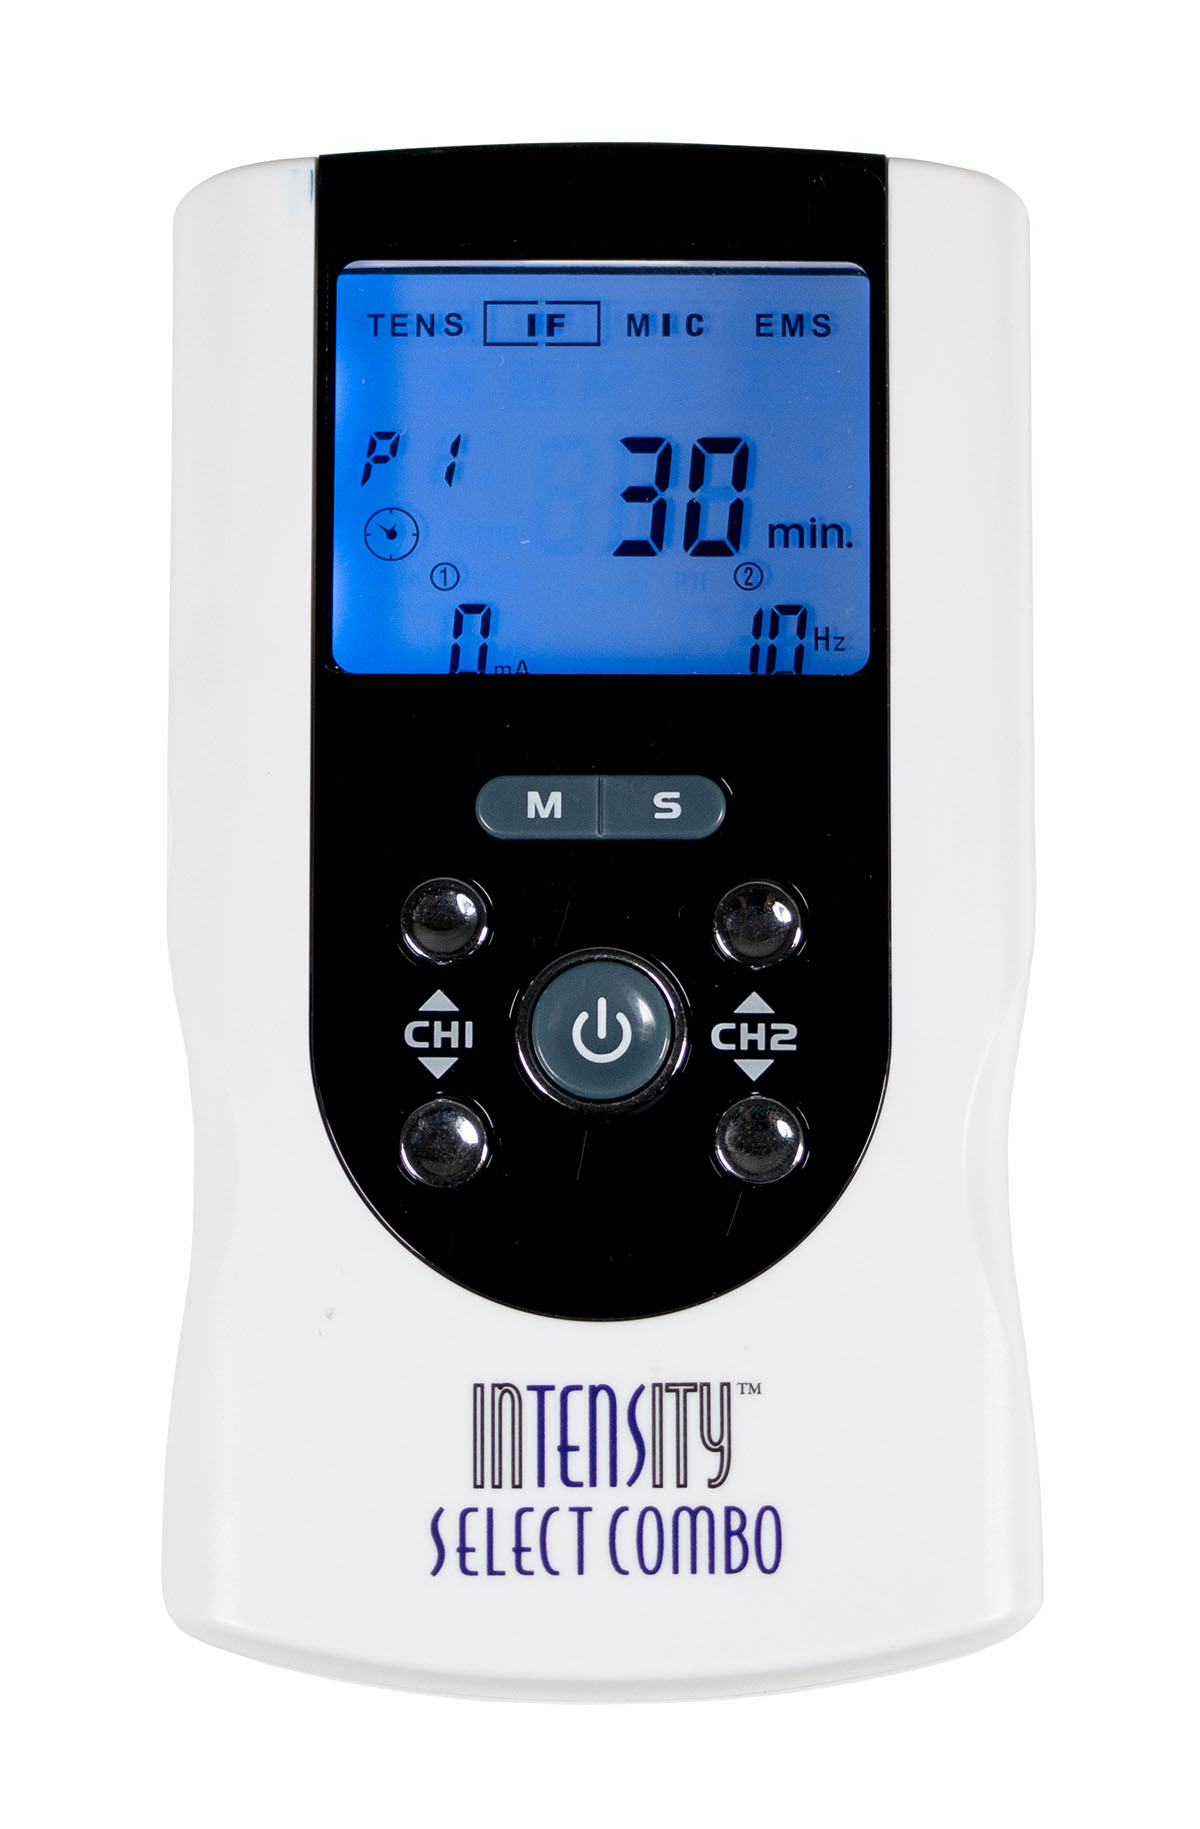 Digital 5-Mode TENS Unit for ED by ProMed PM365